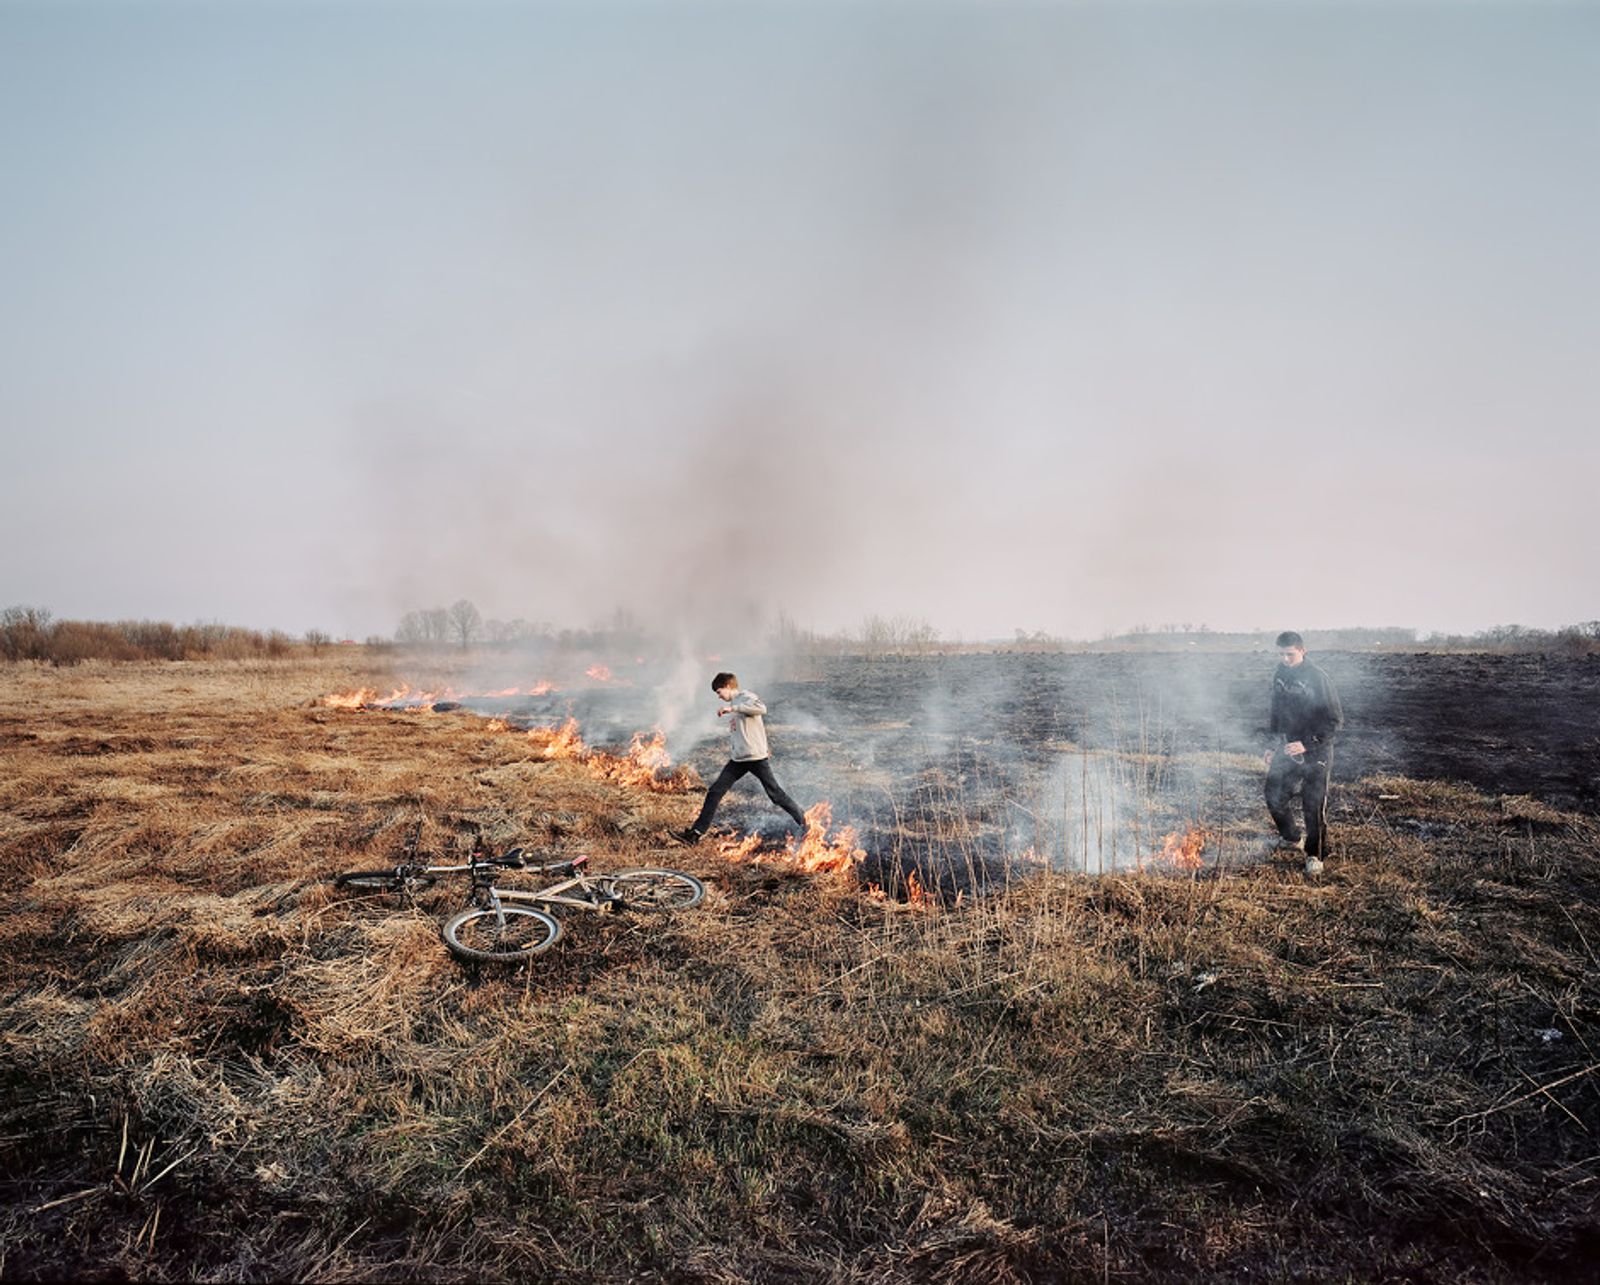 © Reinis Hofmanis - Image from the Fire photography project